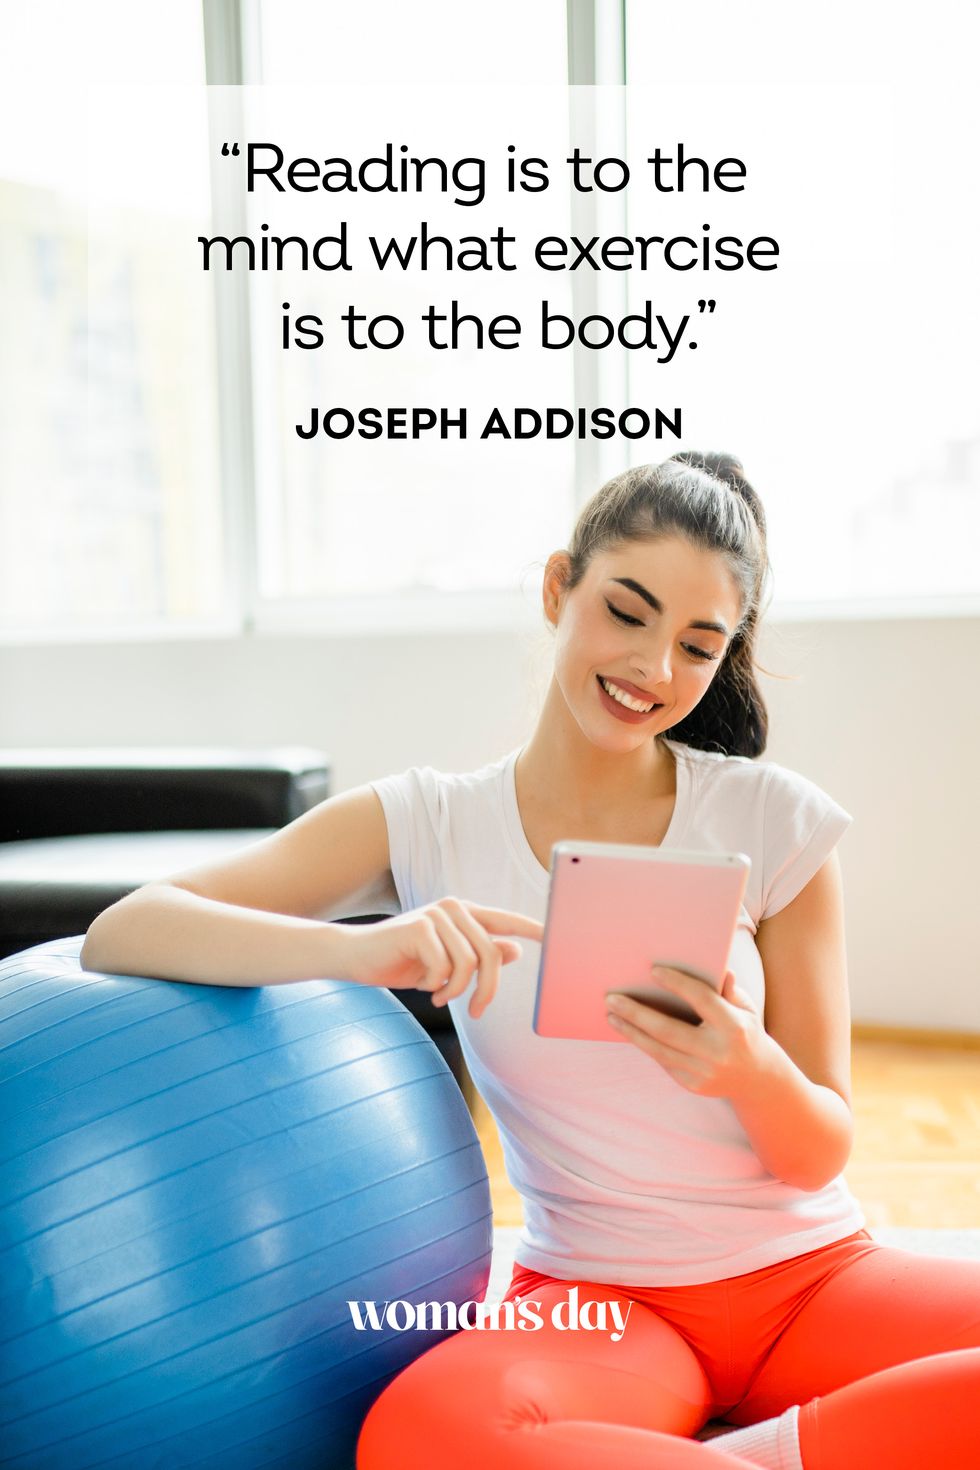 50 Pilates quotes from Joseph Pilates and other famous people